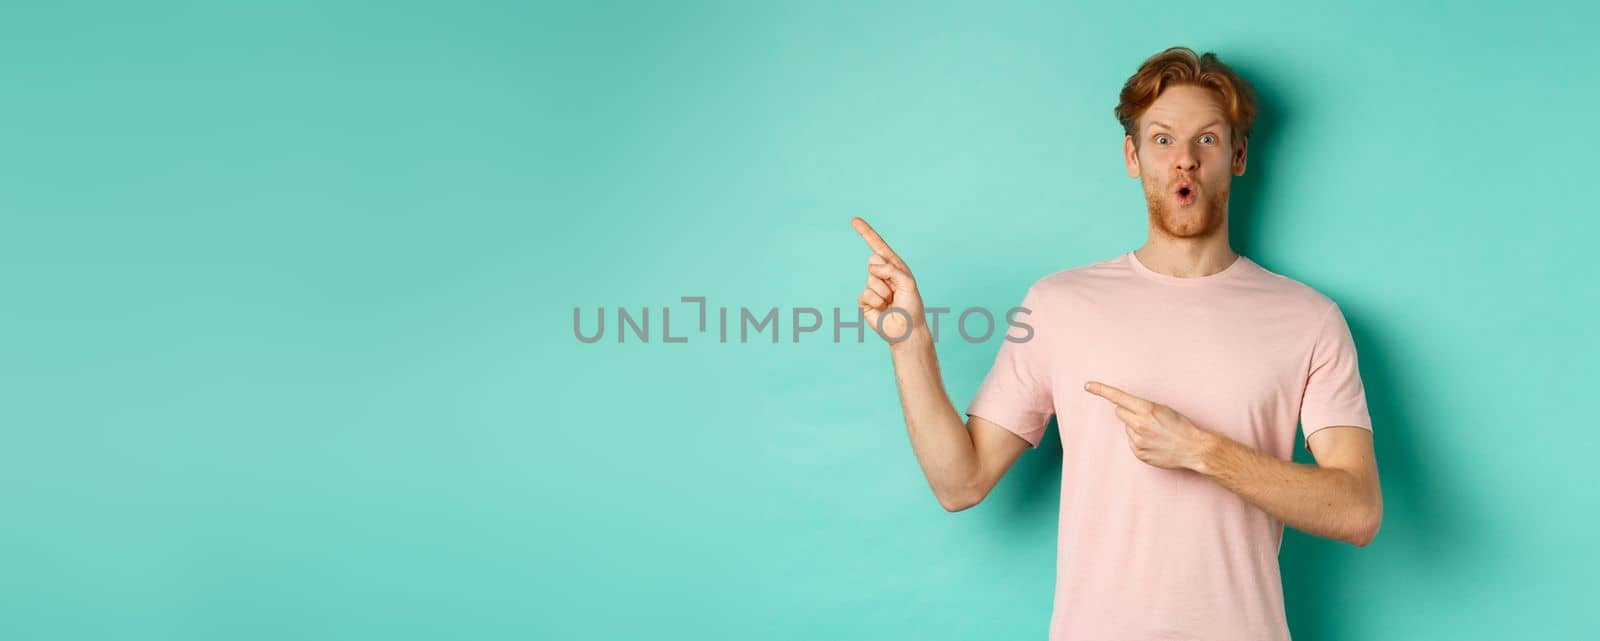 Amazed young man with red hair and beard, gasping amazed, pointing at upper left corner and showing promo, checking out advertisement, standing over turquoise background.